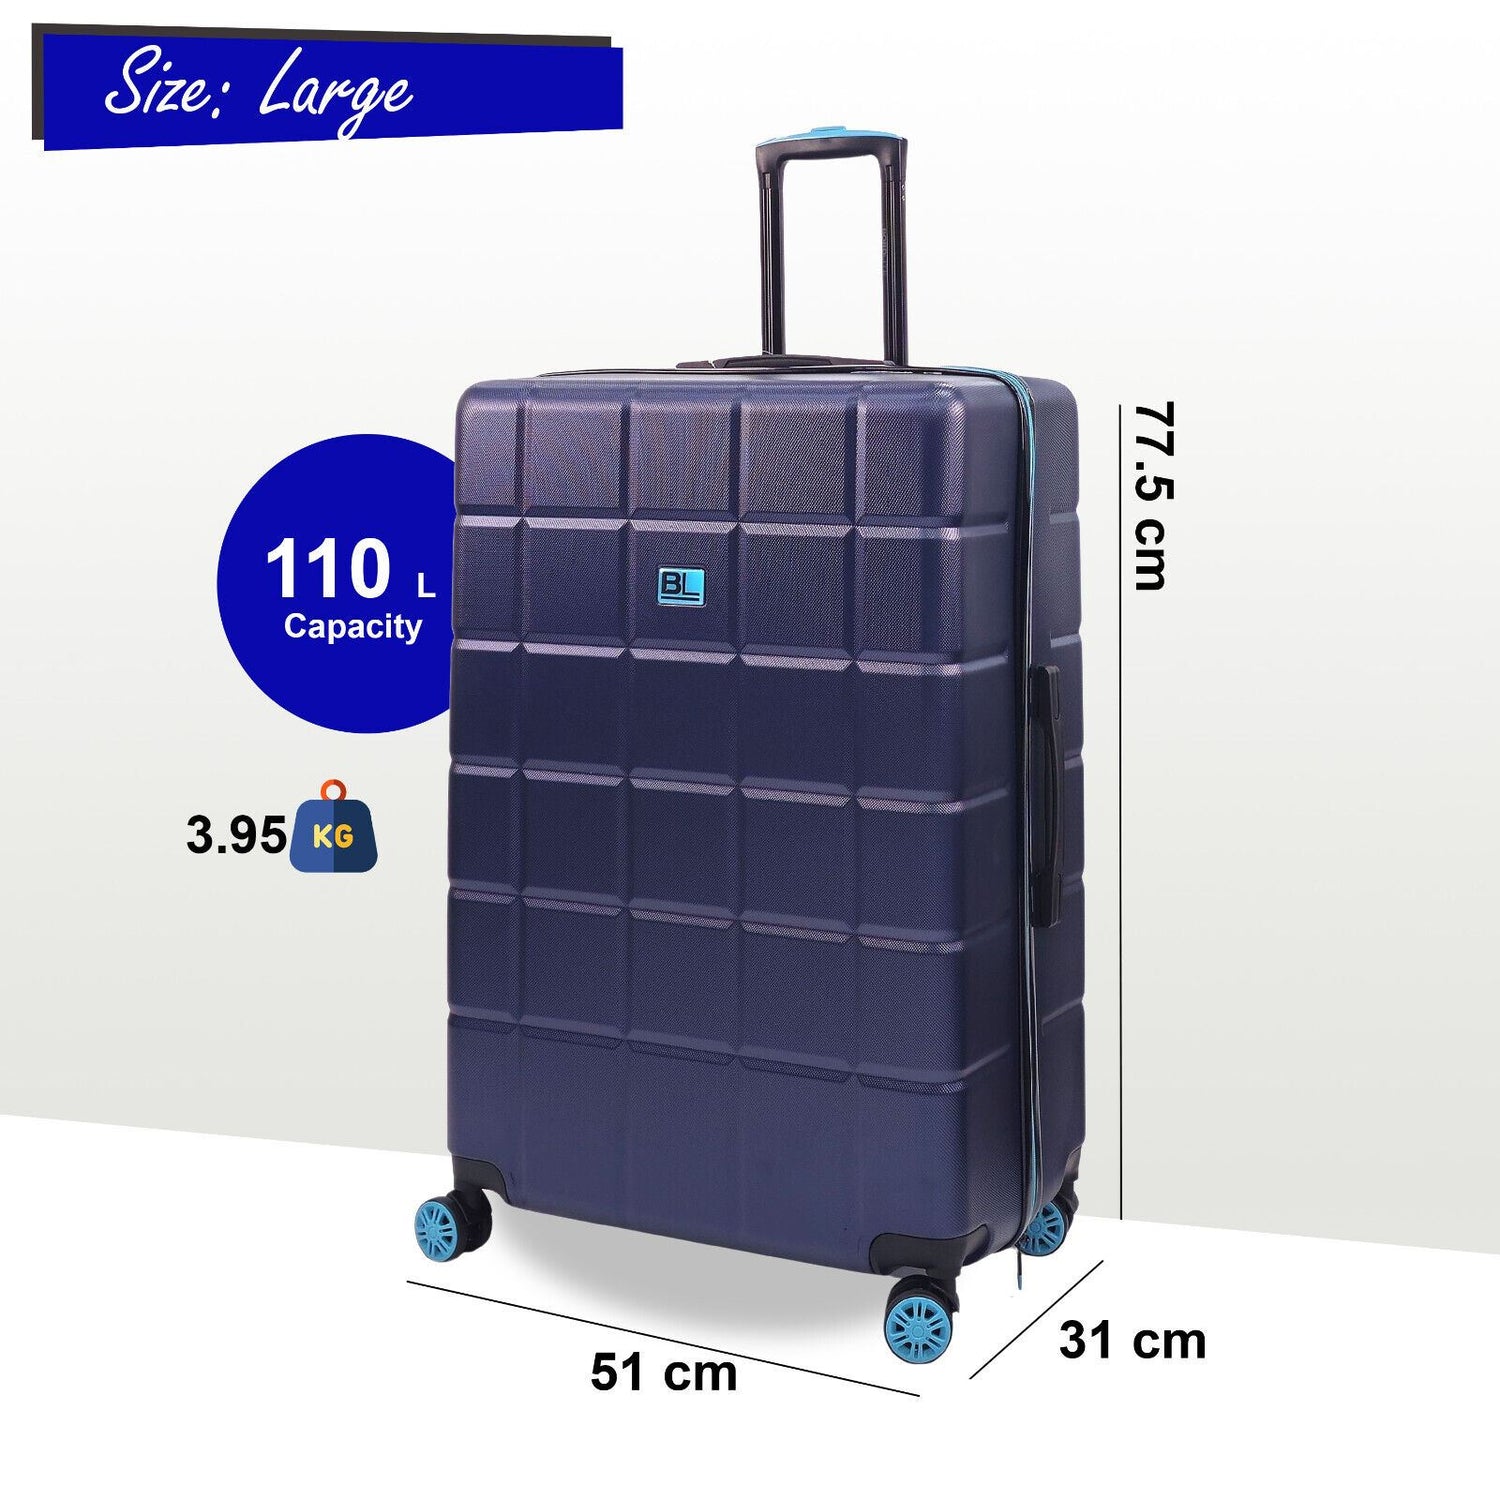 Collinsville Large Soft Shell Suitcase in Navy